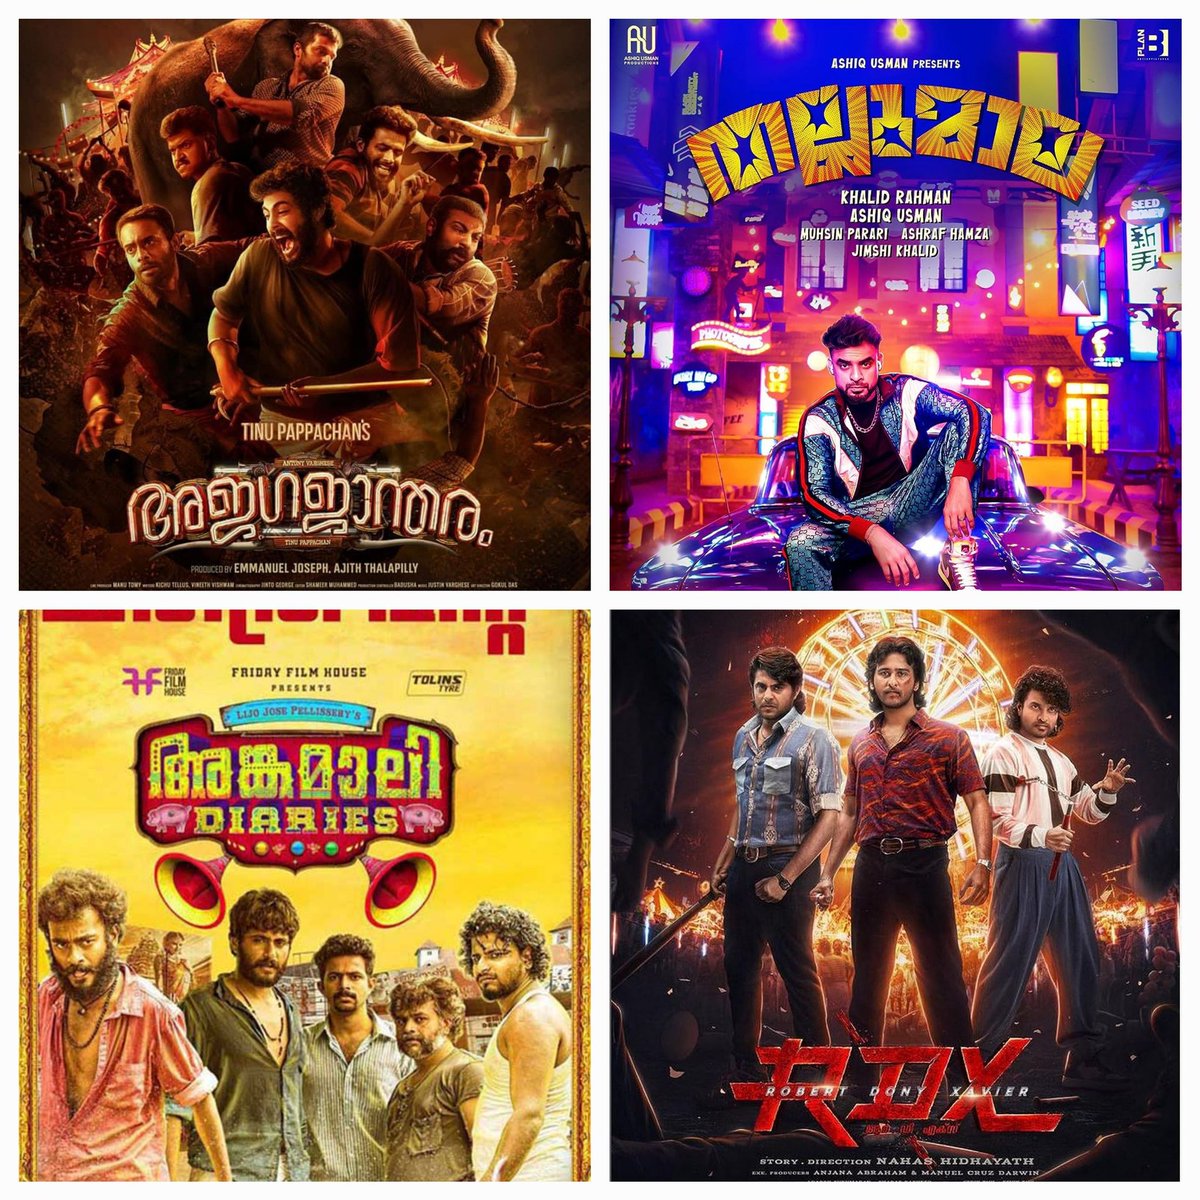 My Picks: #RDX, #Ajagajantharam & #AngamalyDiaries

Didn't connect with #Thallumaala at all. However, Ajagajantharam & Angamaly Diaries were outstanding; watched multiple times. RDX was emotionally gripping & . One of the most memorable experiences recently